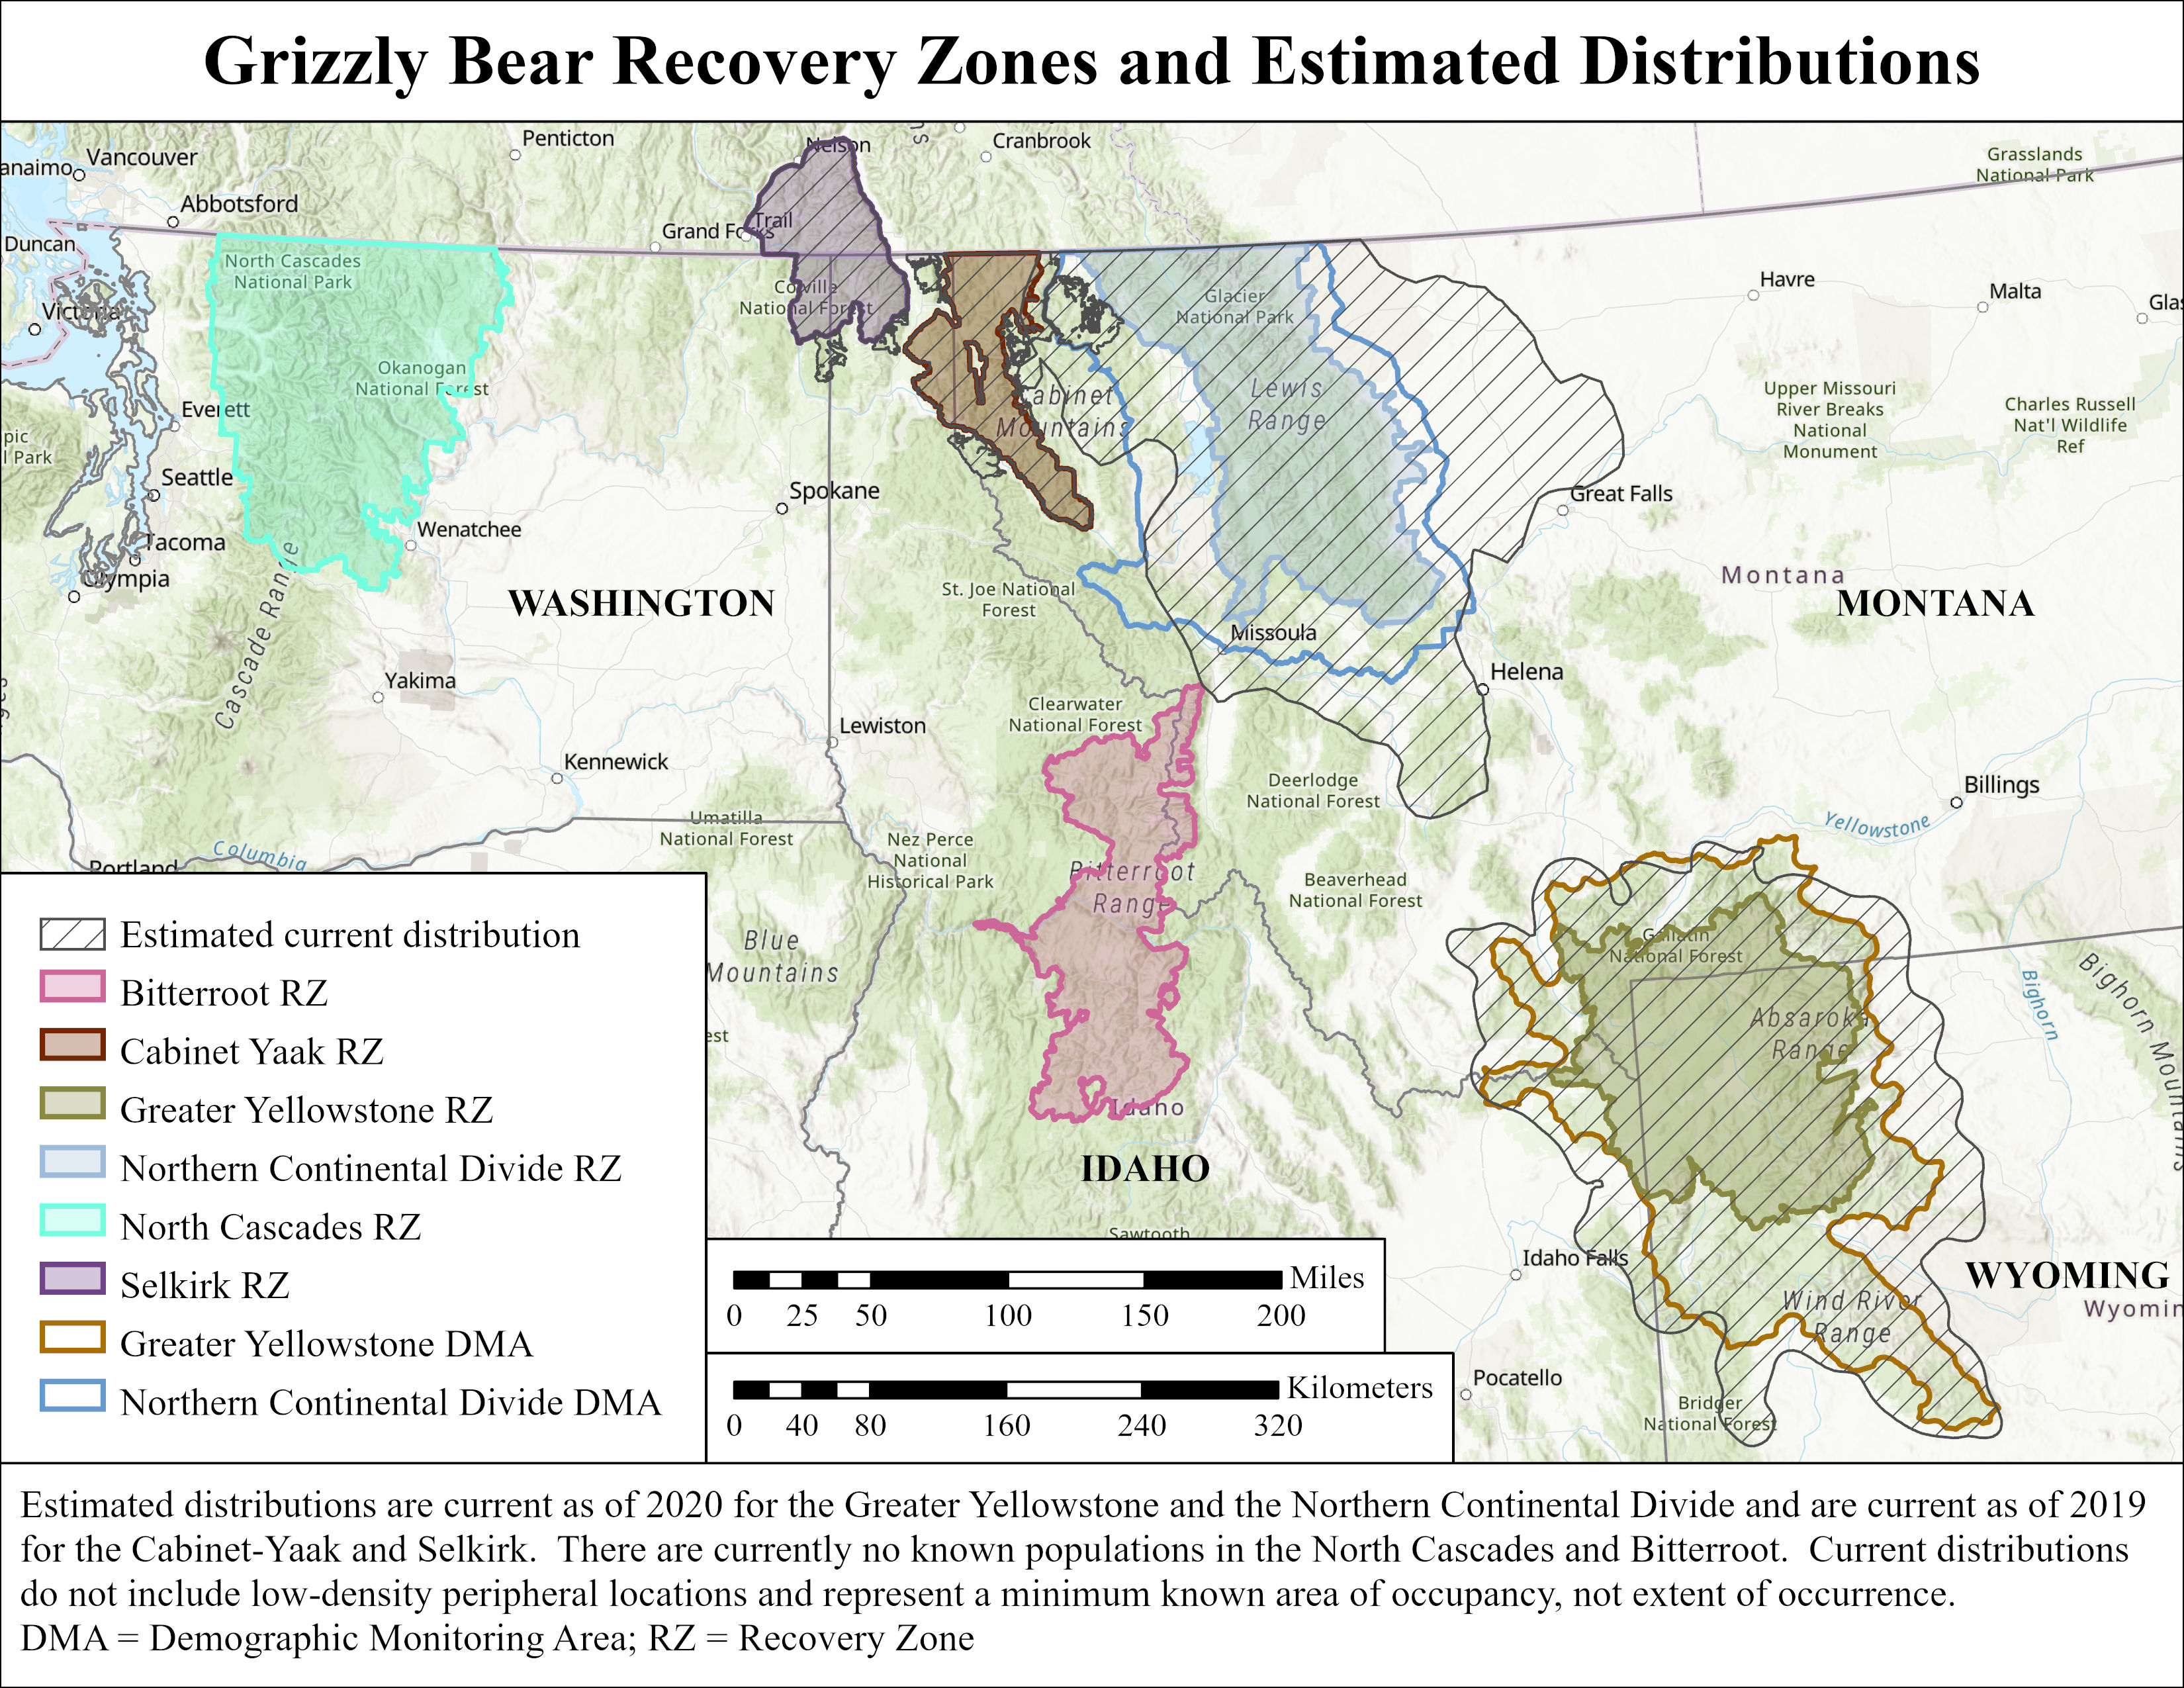 Map of Washington, Idaho, Montana, and Wyoming showing estimated distributions of grizzly bear populations and their recovery zones. 